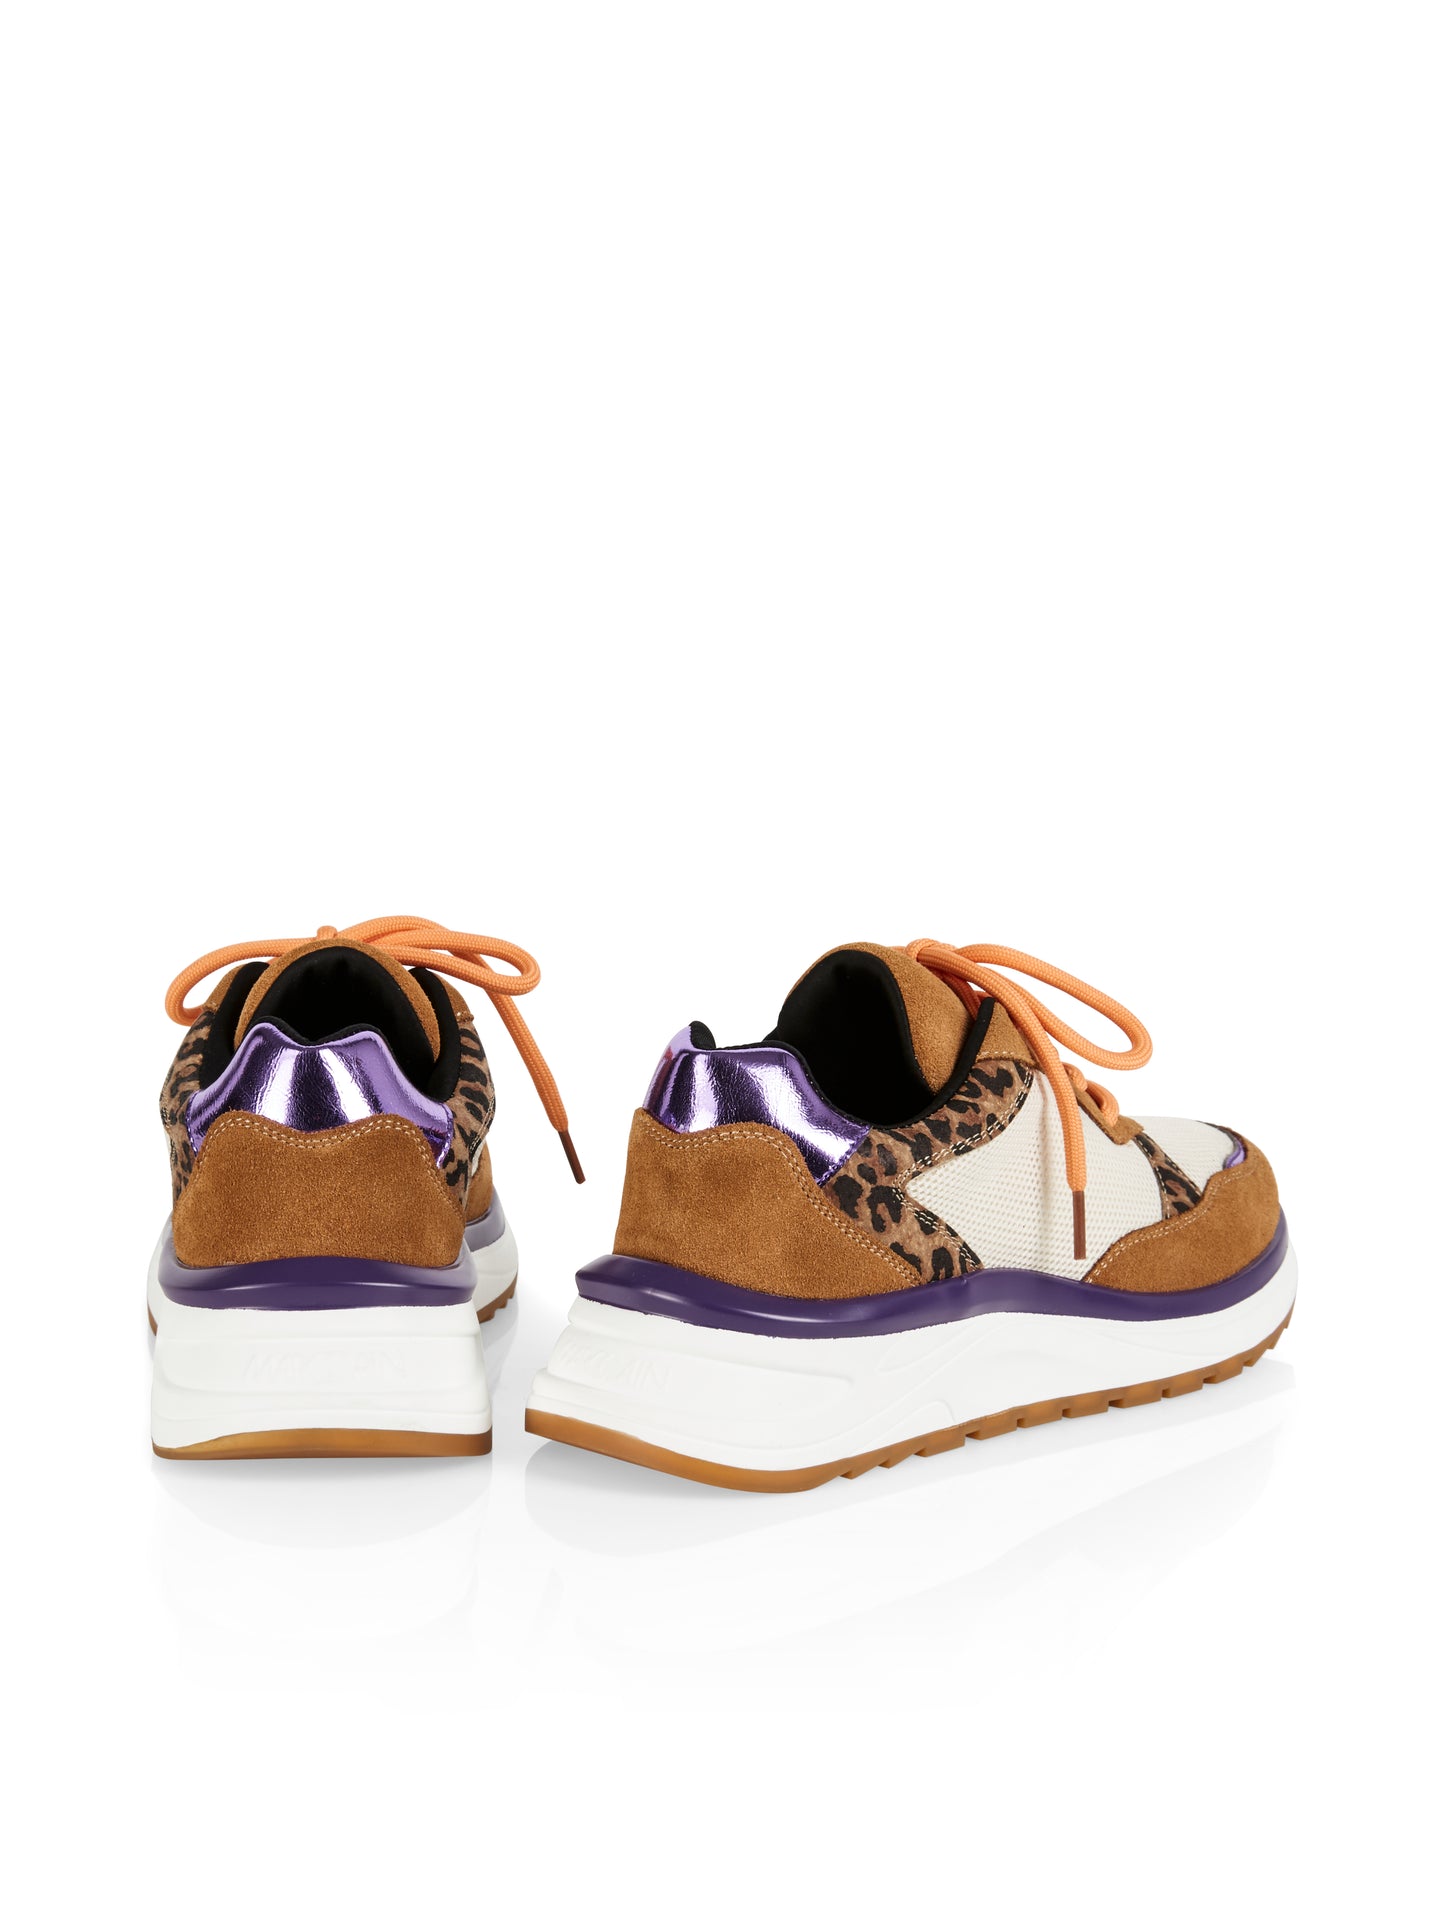 Marc Cain Bags & Shoes Purple & Coral Trainers